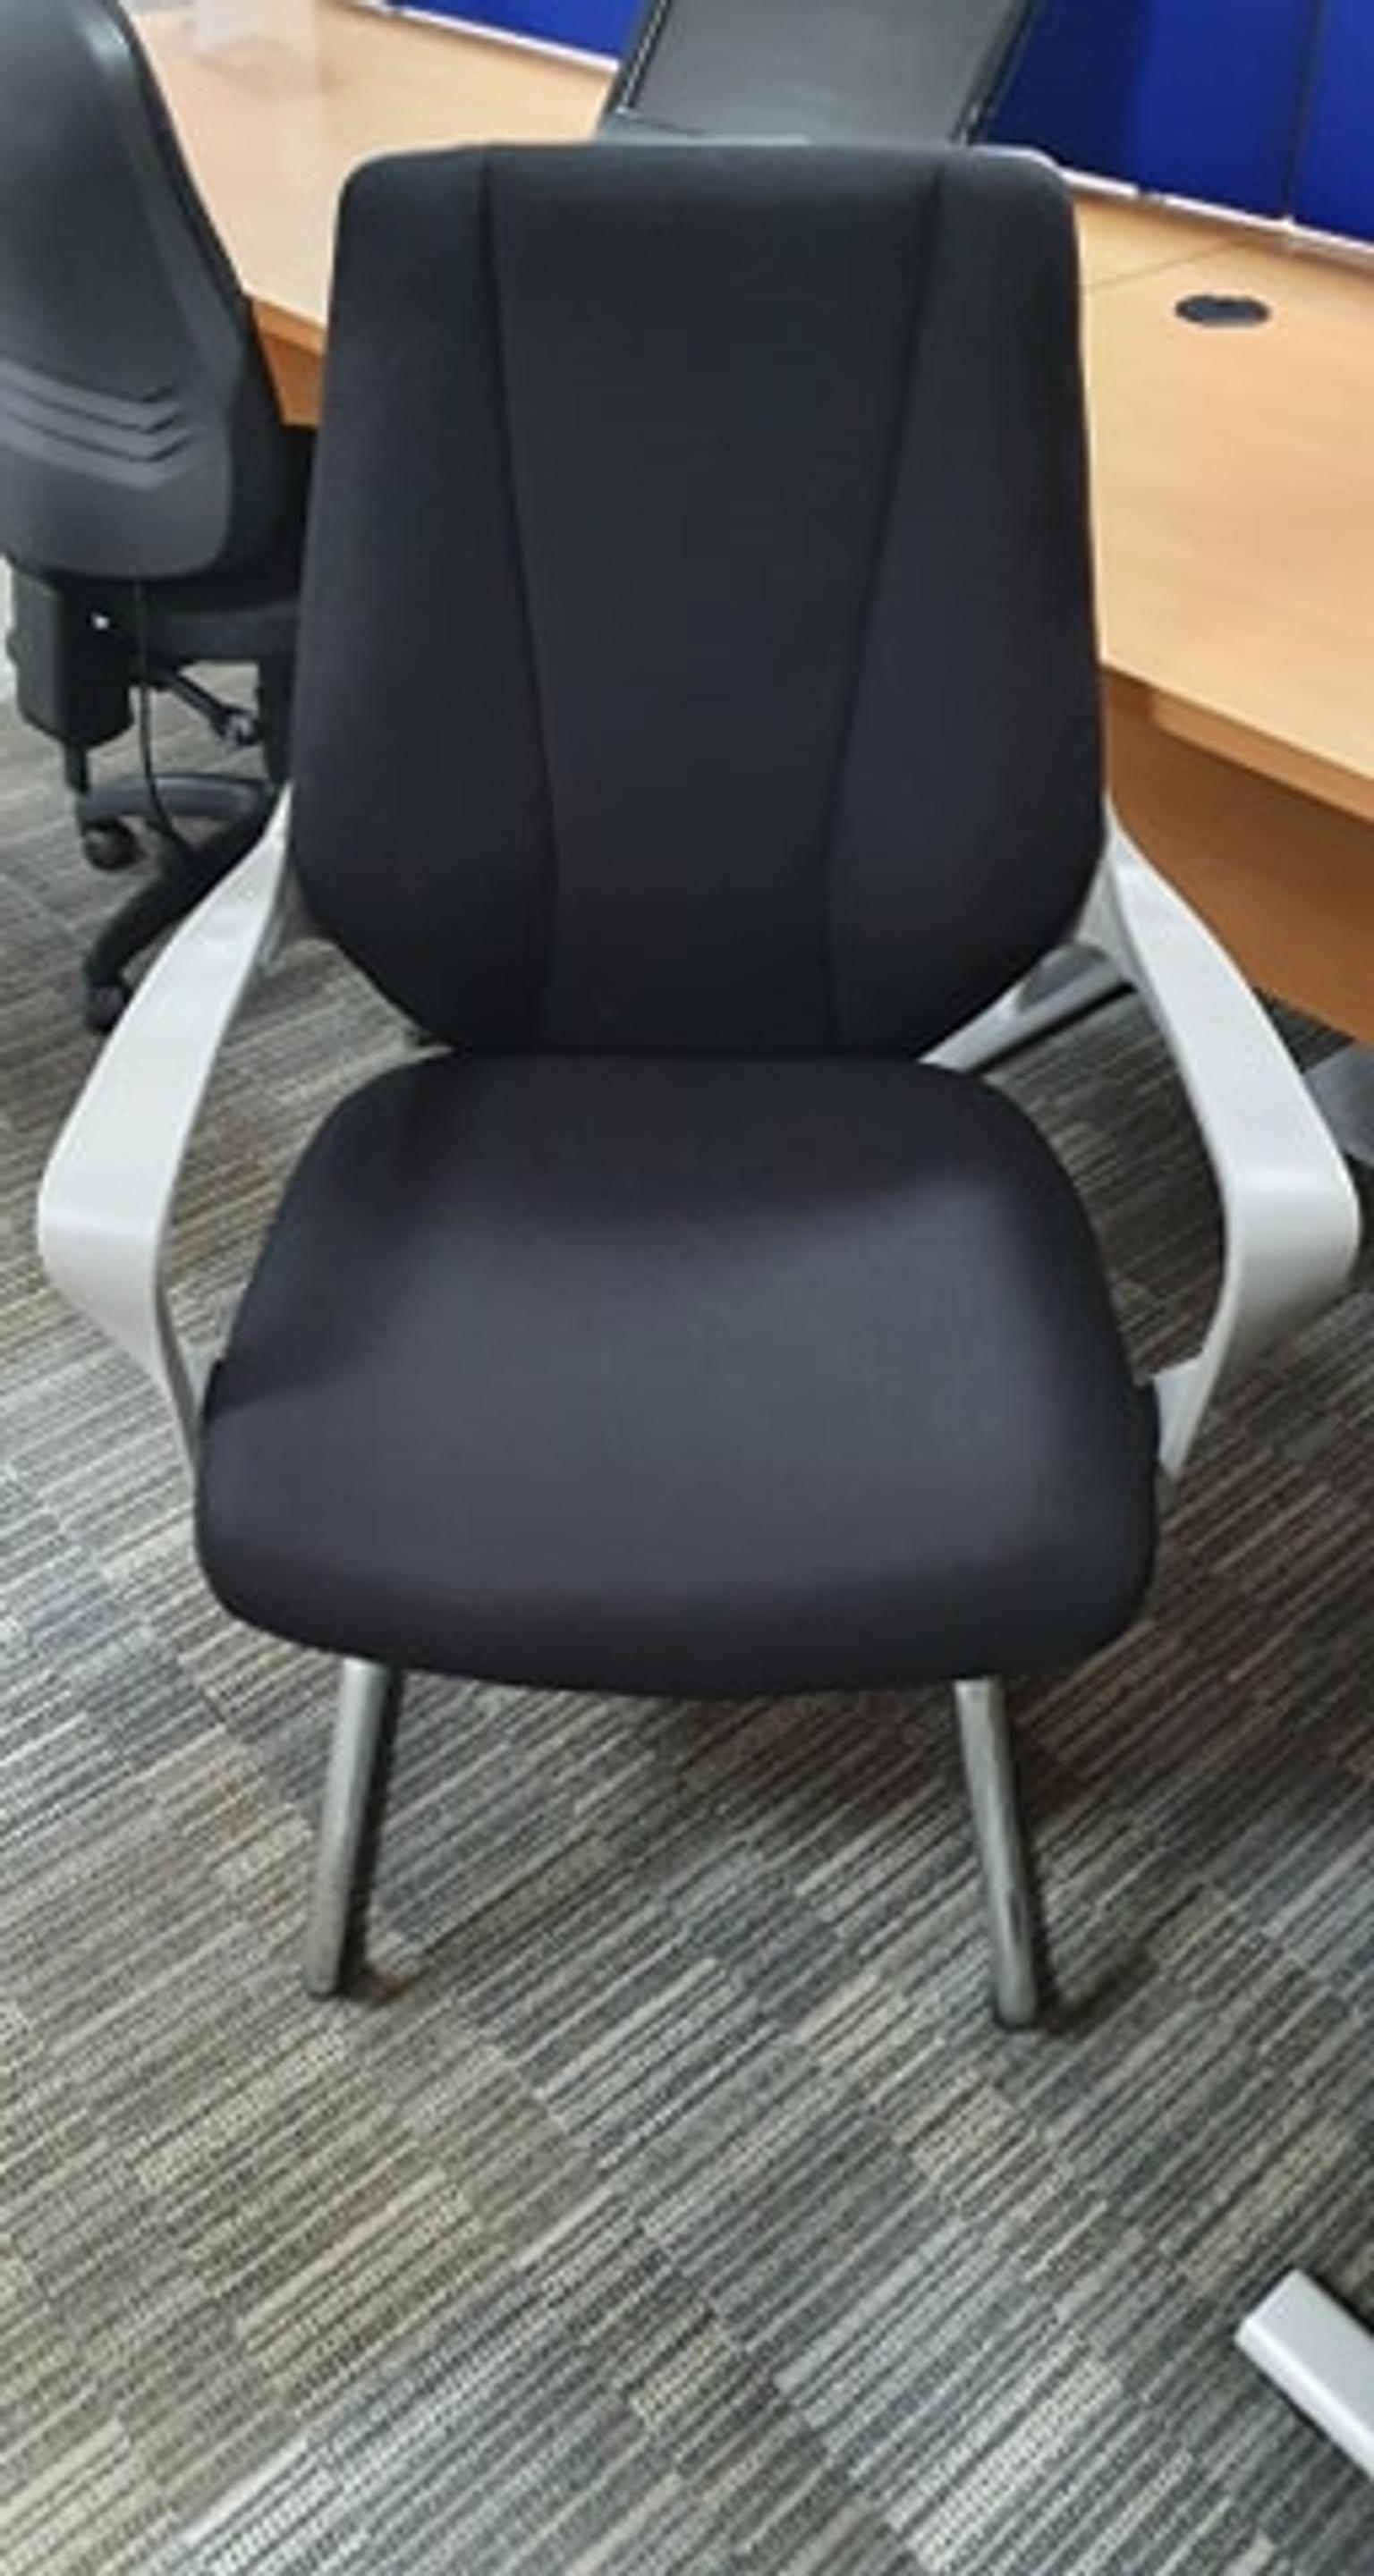 Office Chair Meeting Chair Cheap Chair In B24 Birmingham For 40 00 For Sale Shpock